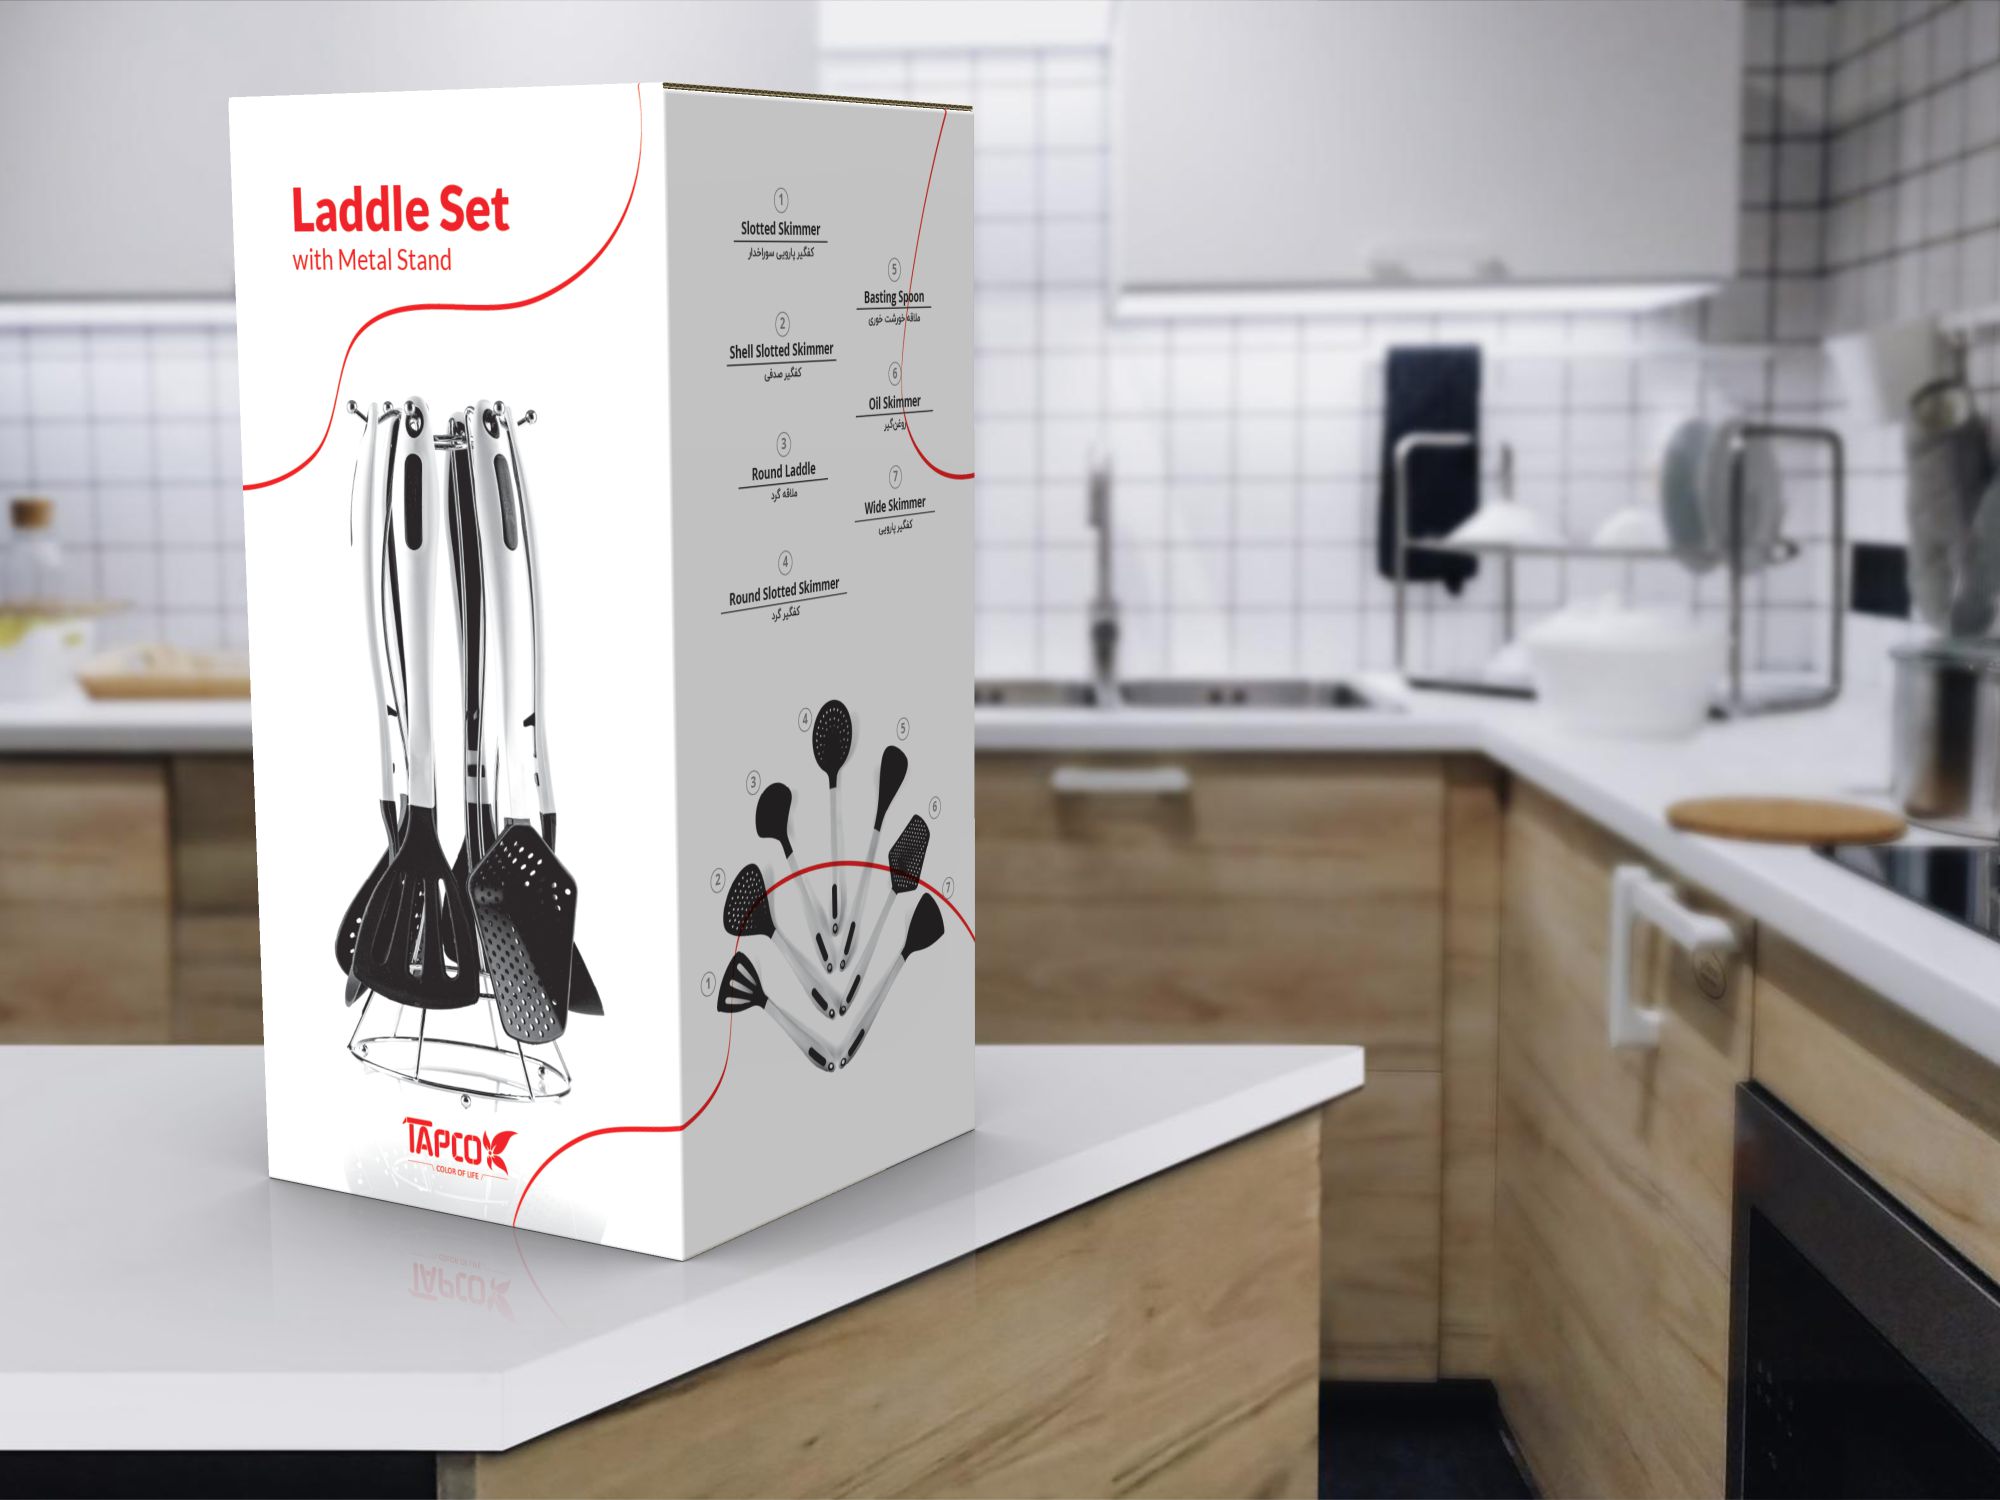 Tapco Kitchen Utensil Packaging Design with Ladle Set